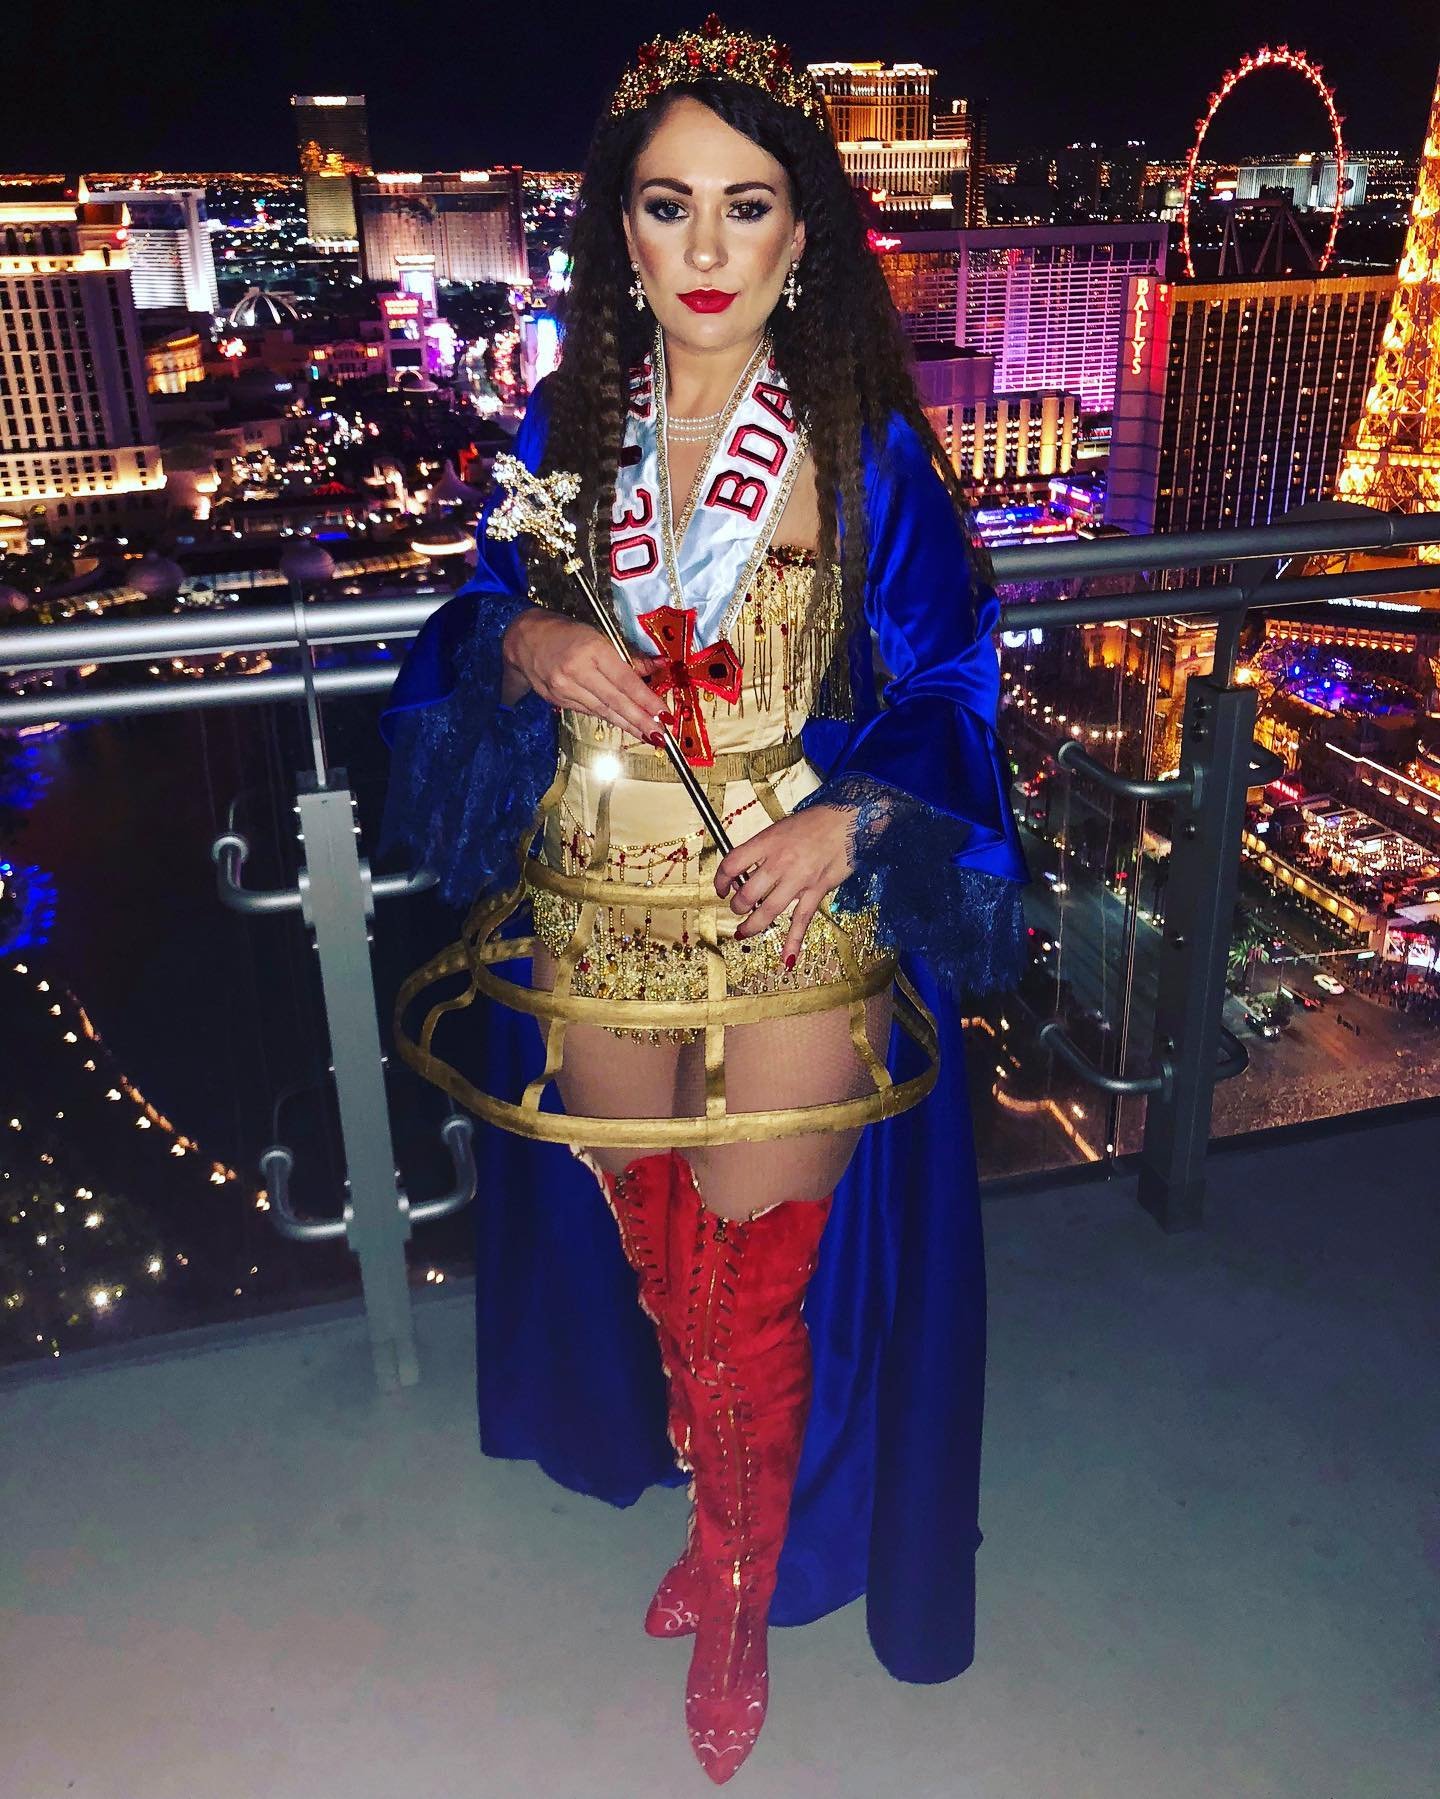 Viva Las Vegas! 🌇
Lights, Sparkle &amp; Glamour! ✨
💙💛❤️💙❤️💛💙💛❤️
.
.
.
It&rsquo;s been a quiet 18 months for @imaginarium_costumes 
as I&rsquo;ve been freelancing on film &amp; TV productions. It&rsquo;s been difficult to carry out commissions 